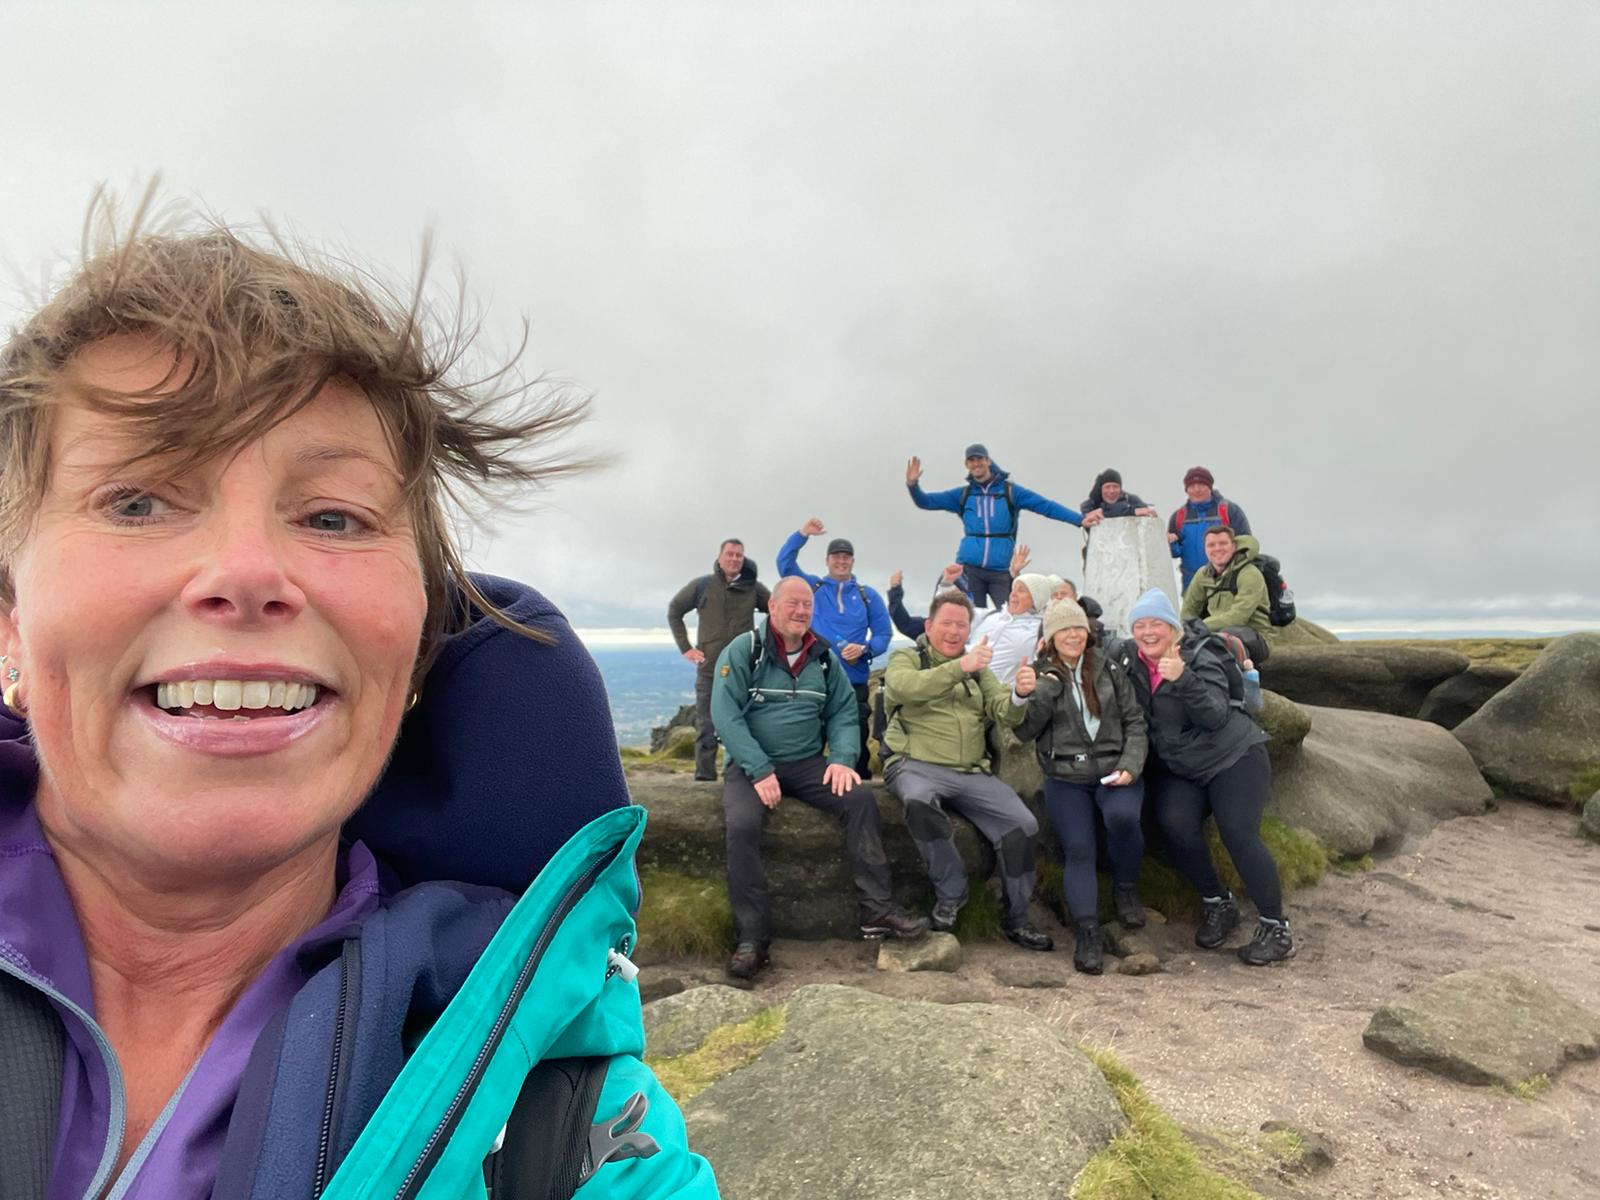 Three Peaks challenge raises thousands of pounds for Prevent ALL